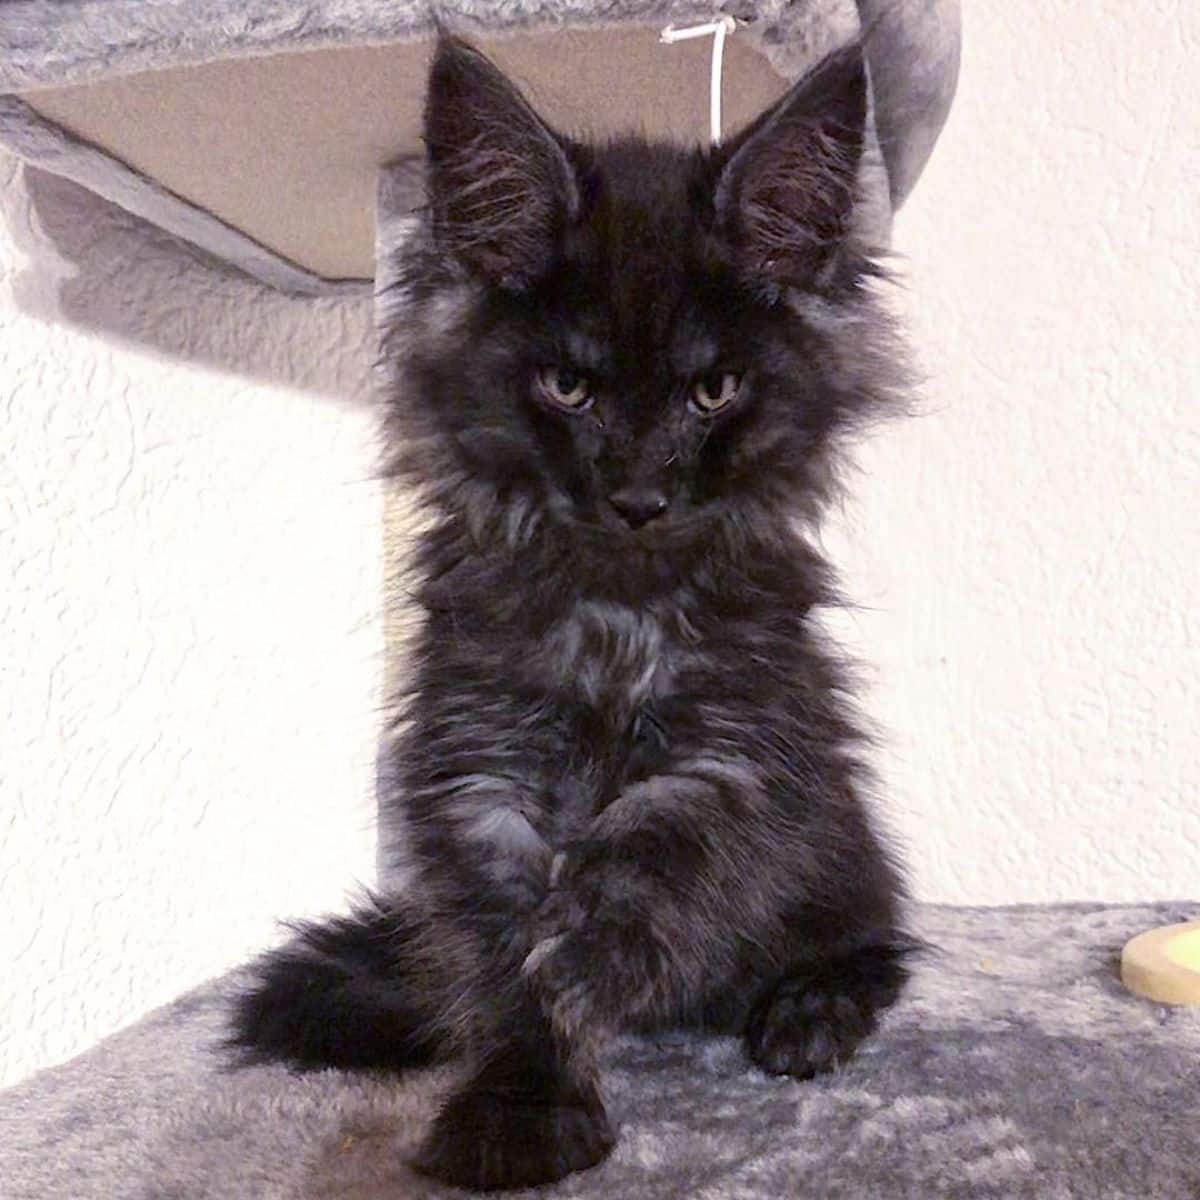 An adorable black maine coon kitten sitting on a cat tree.